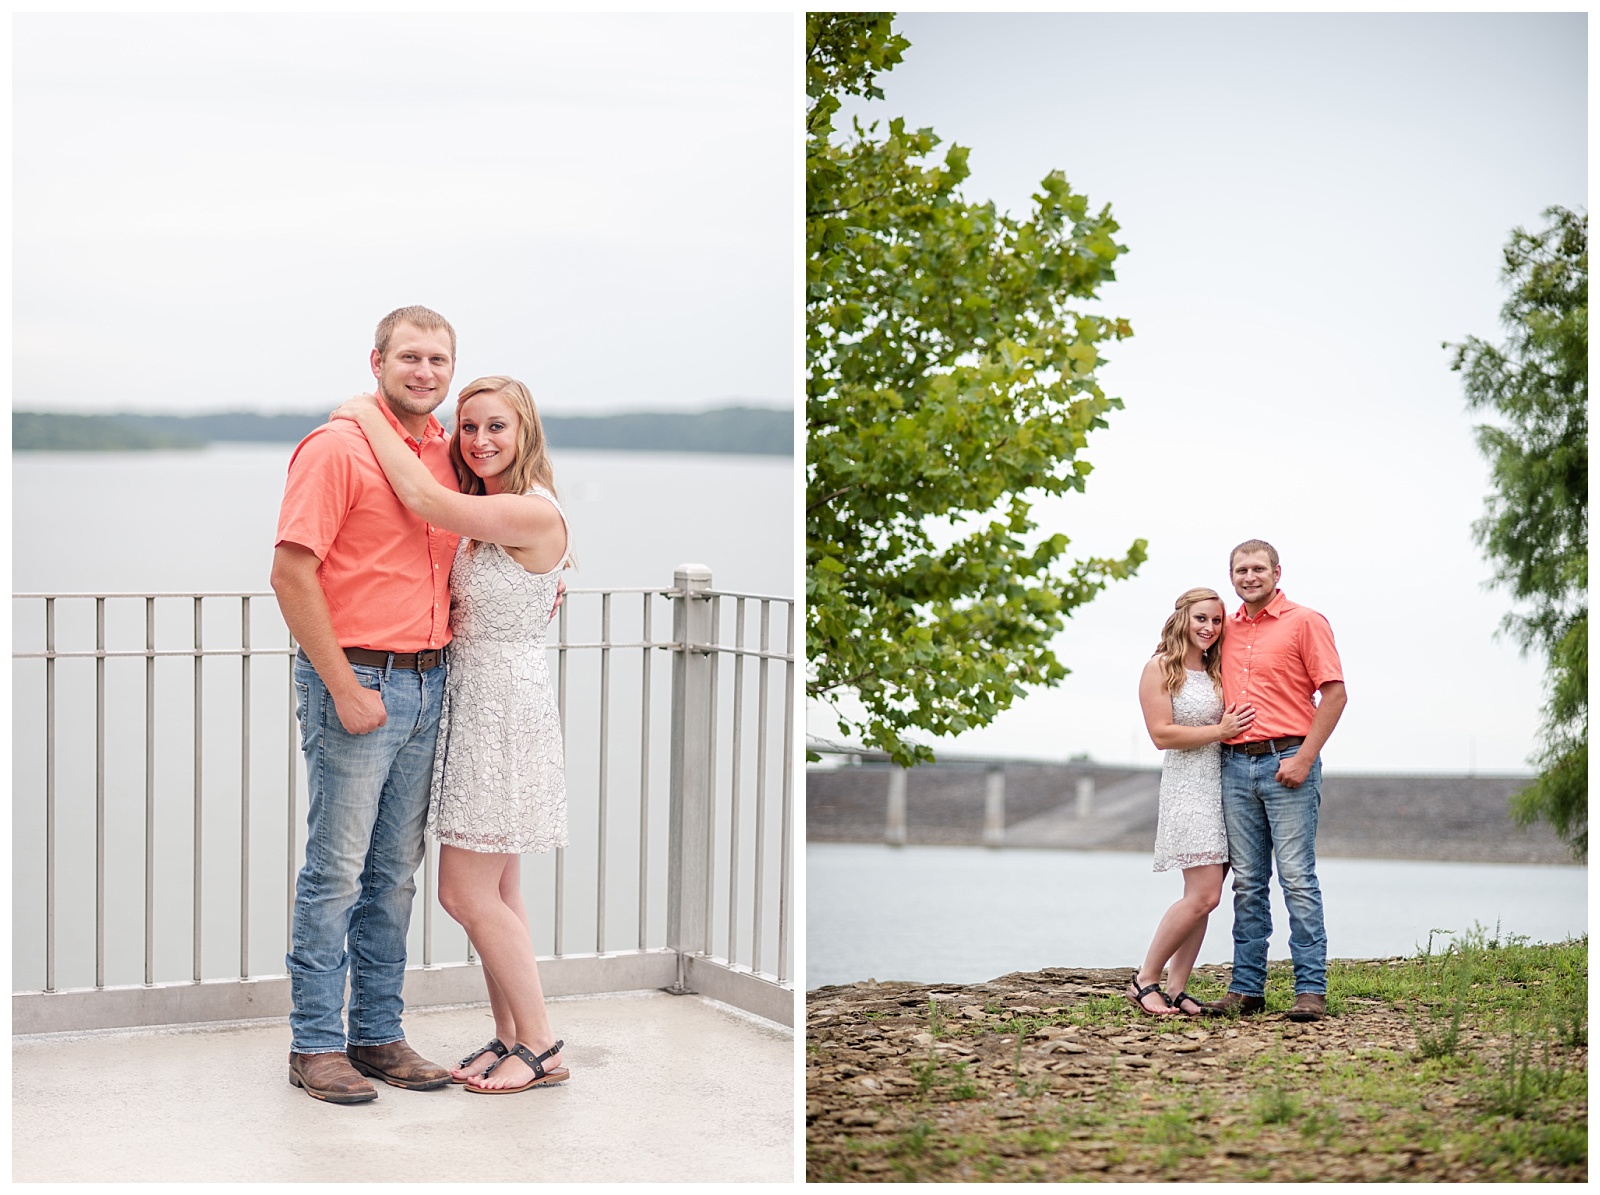 Engagement Session, Lake Pictures